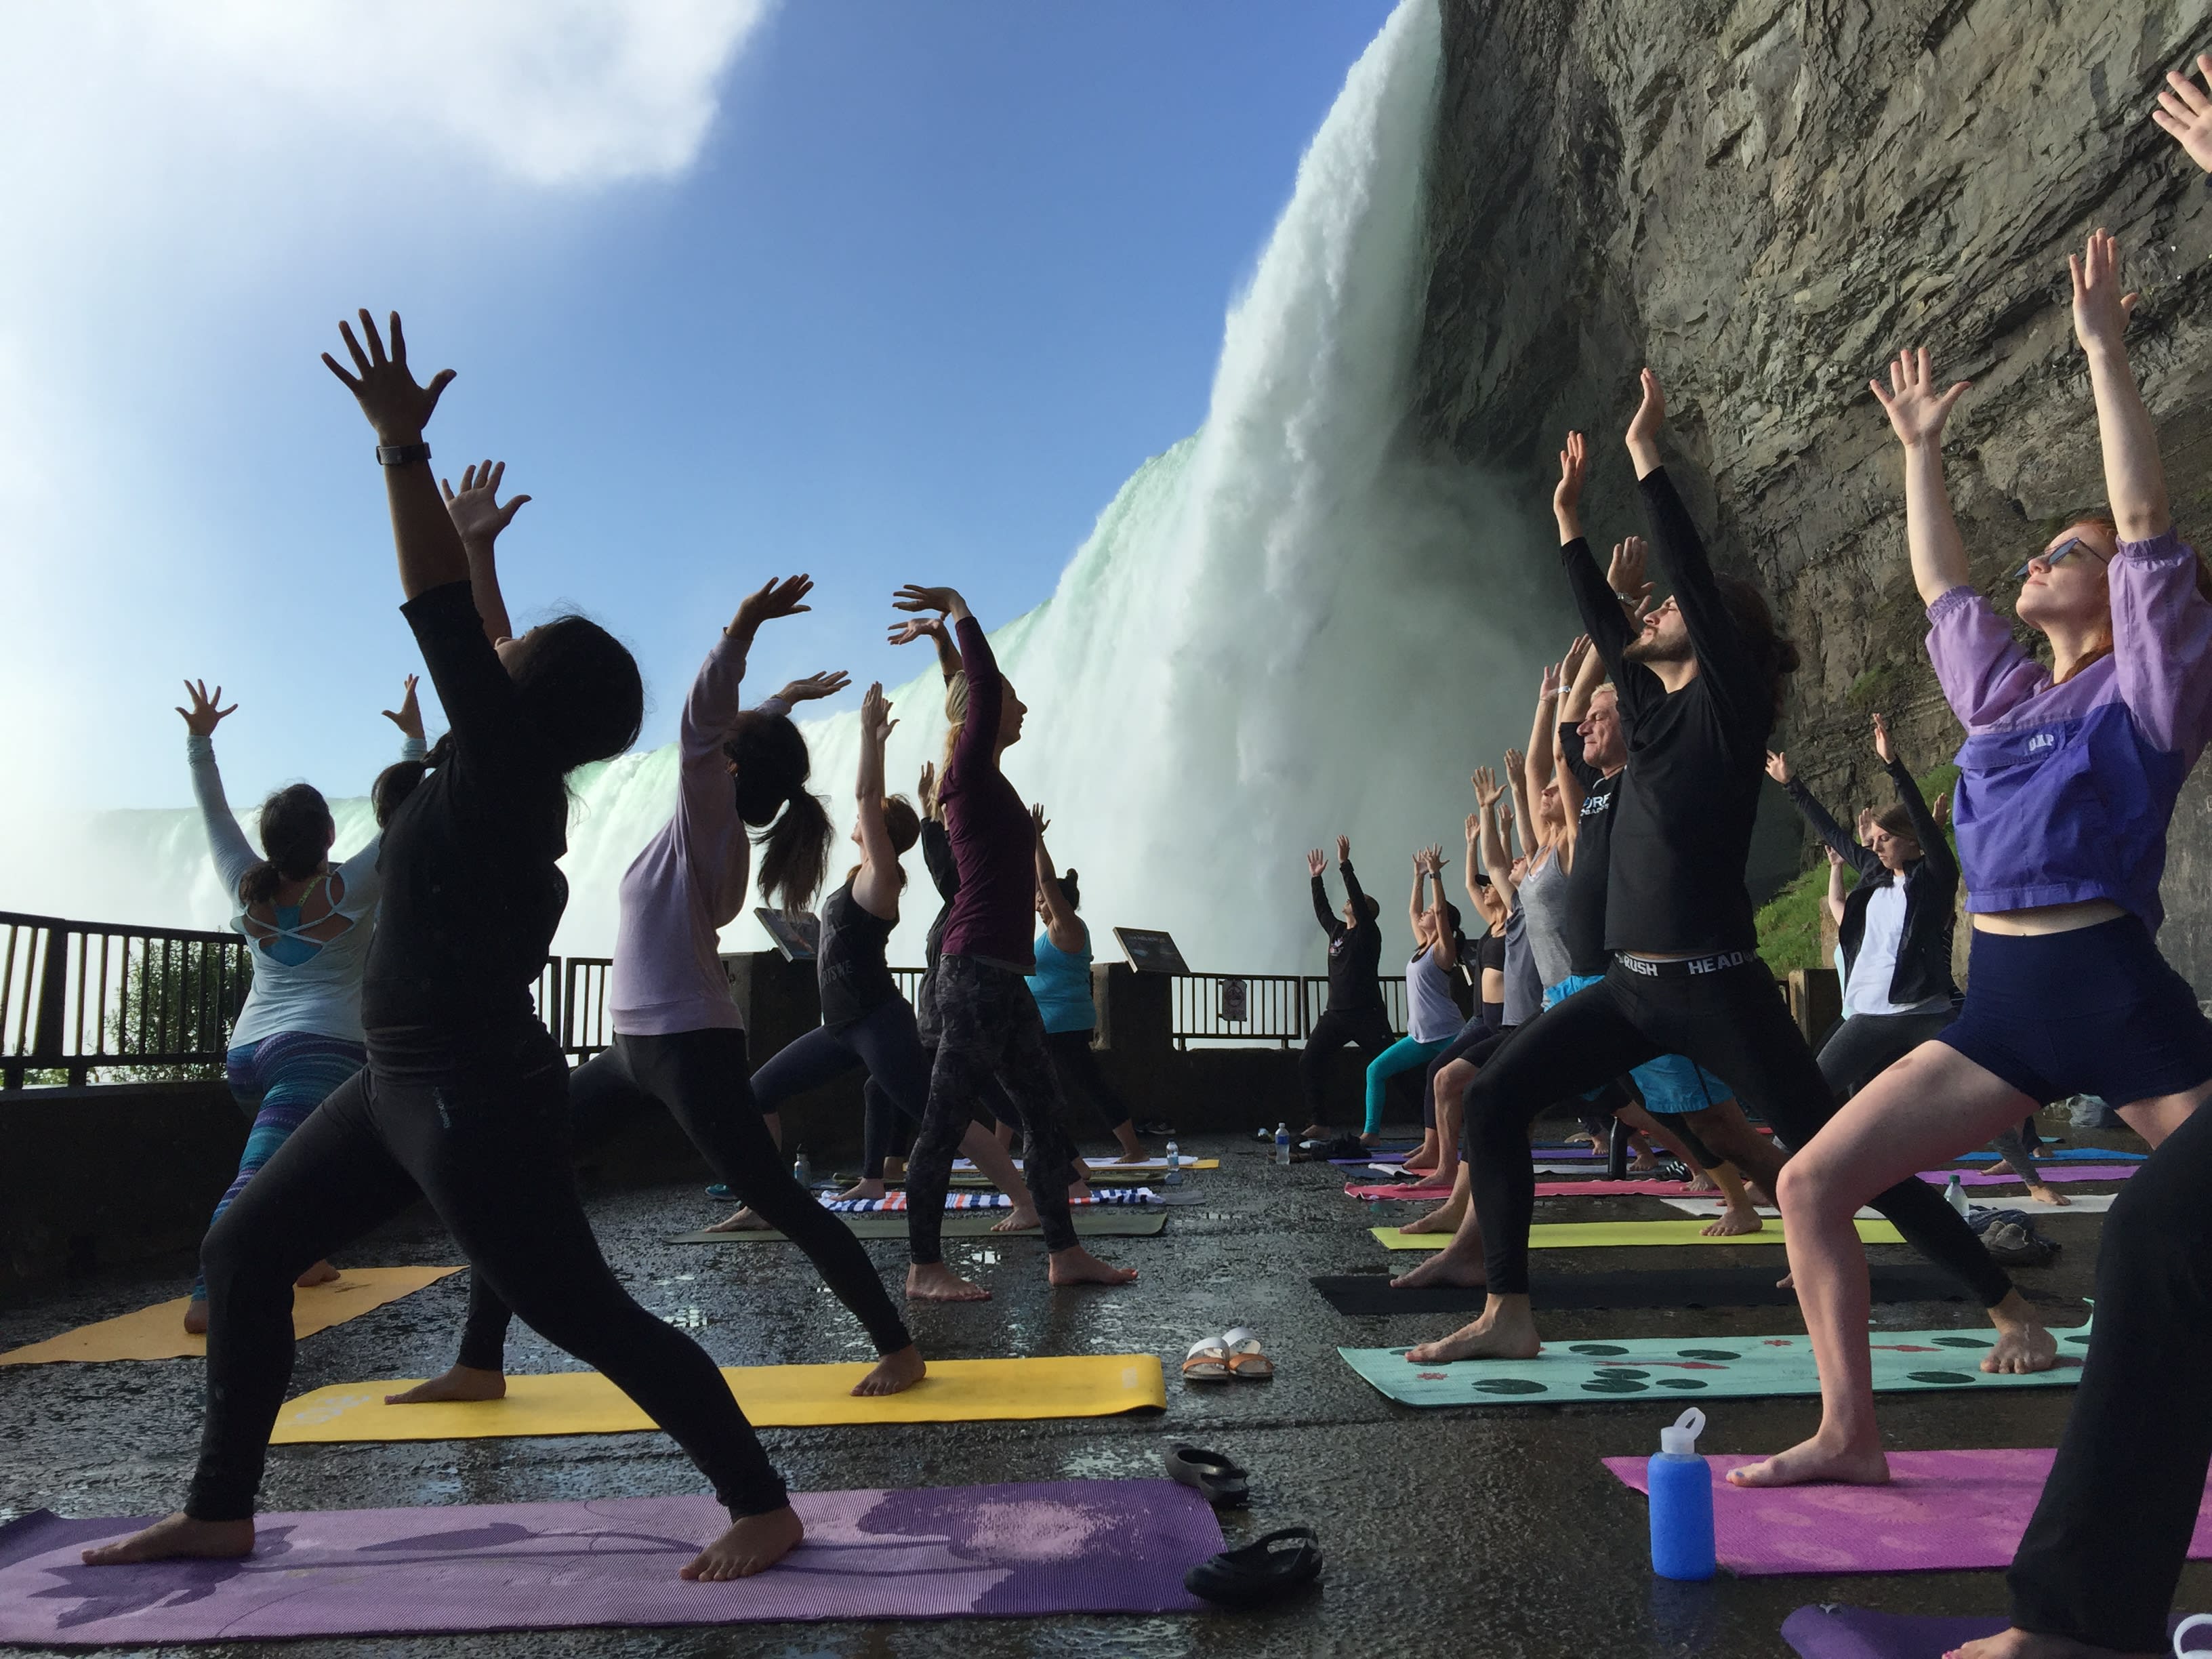 Students stretch while water from the Falls cascades behind them.